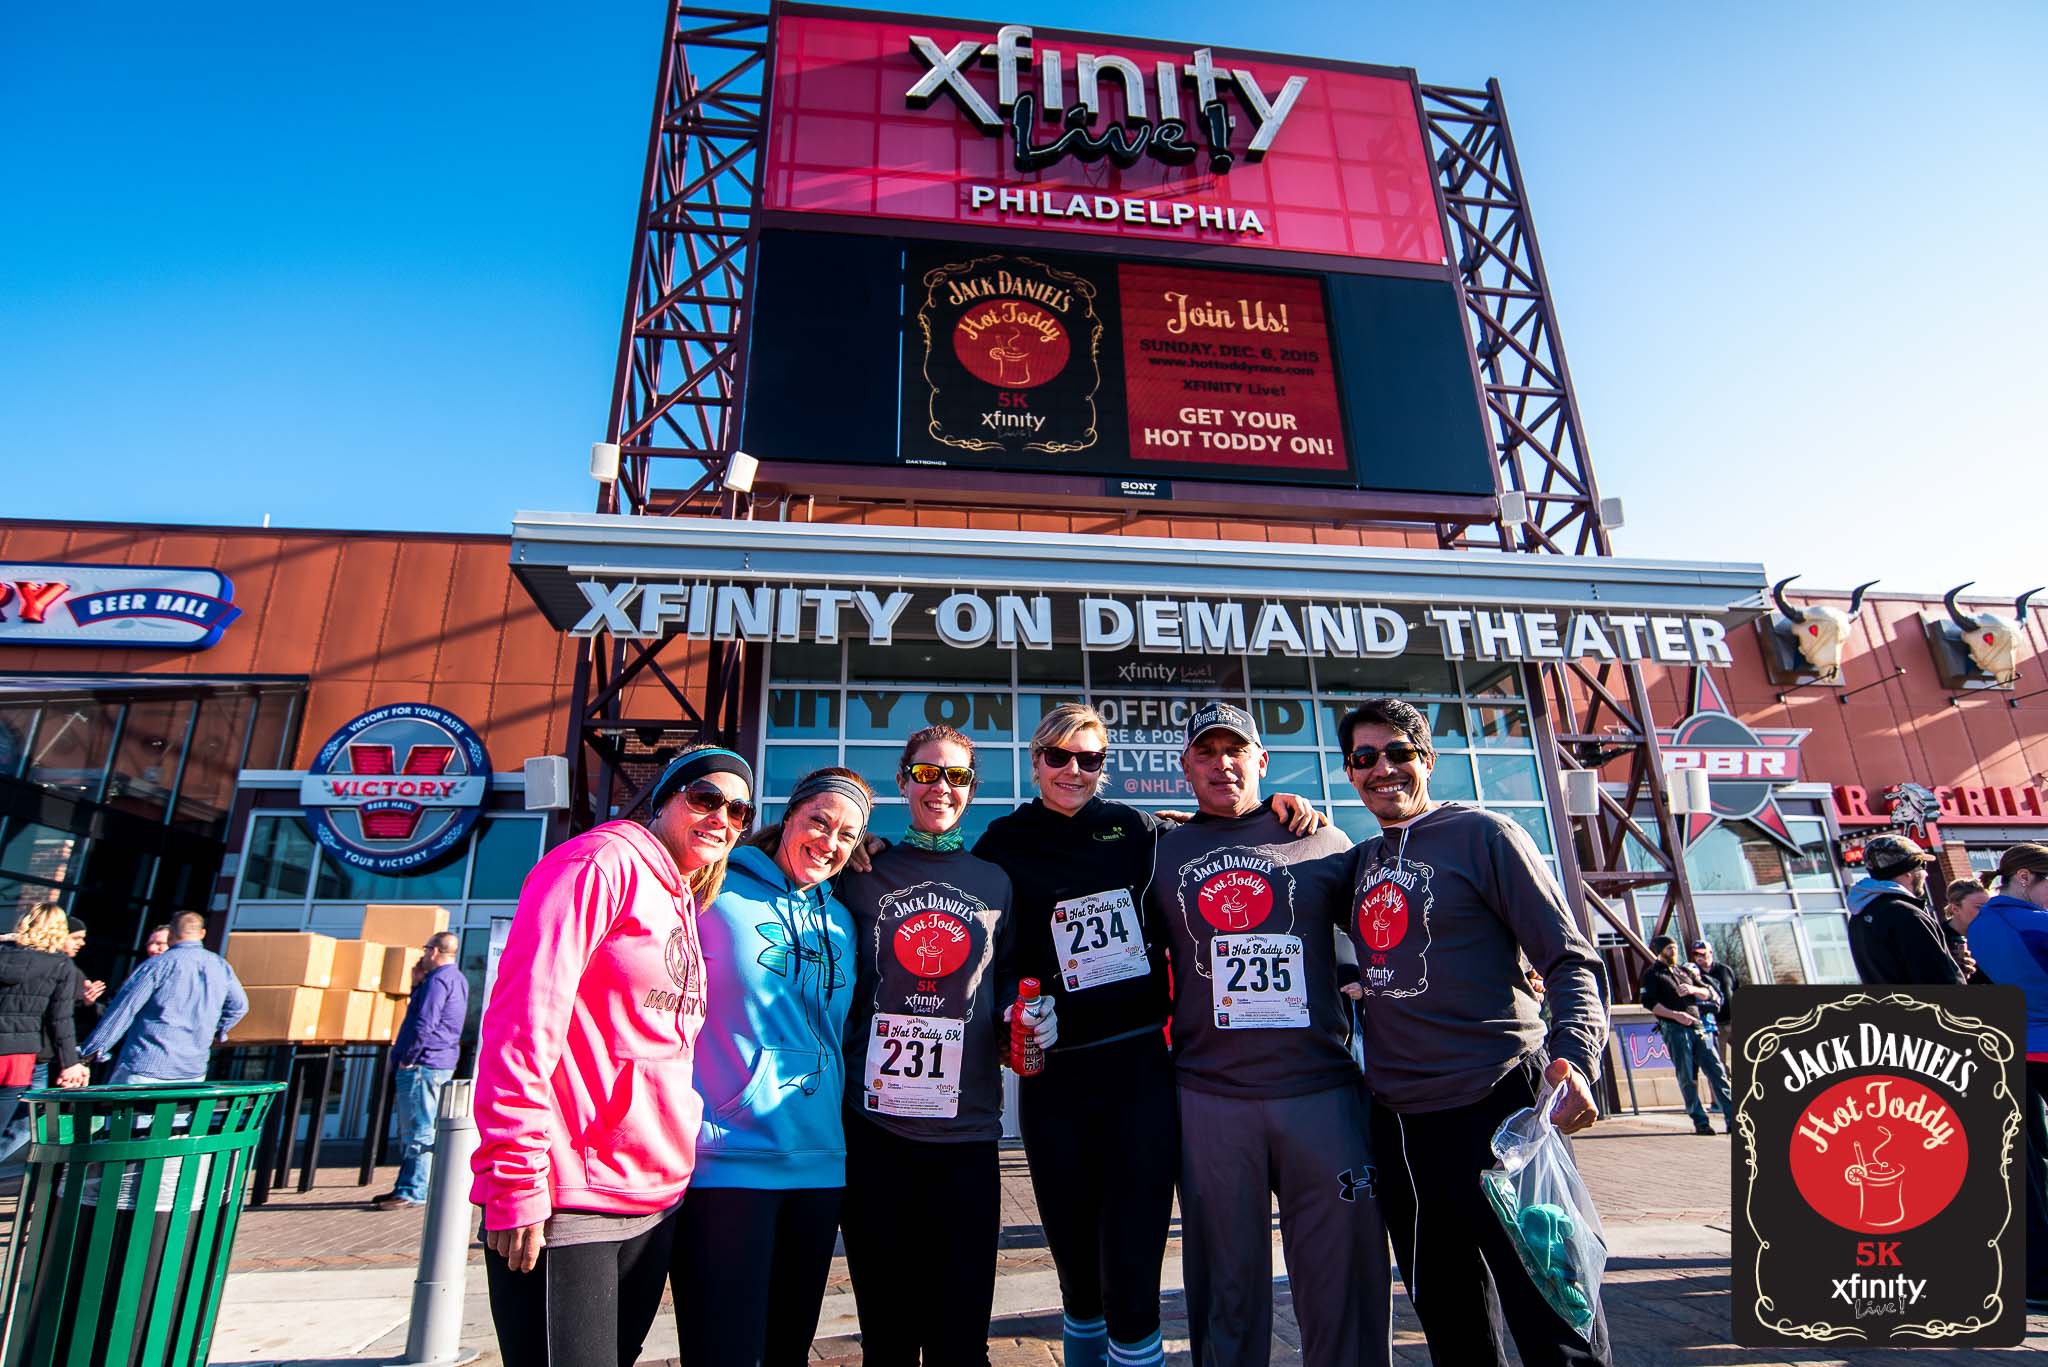 Image result for xfinity live hot toddy 5k